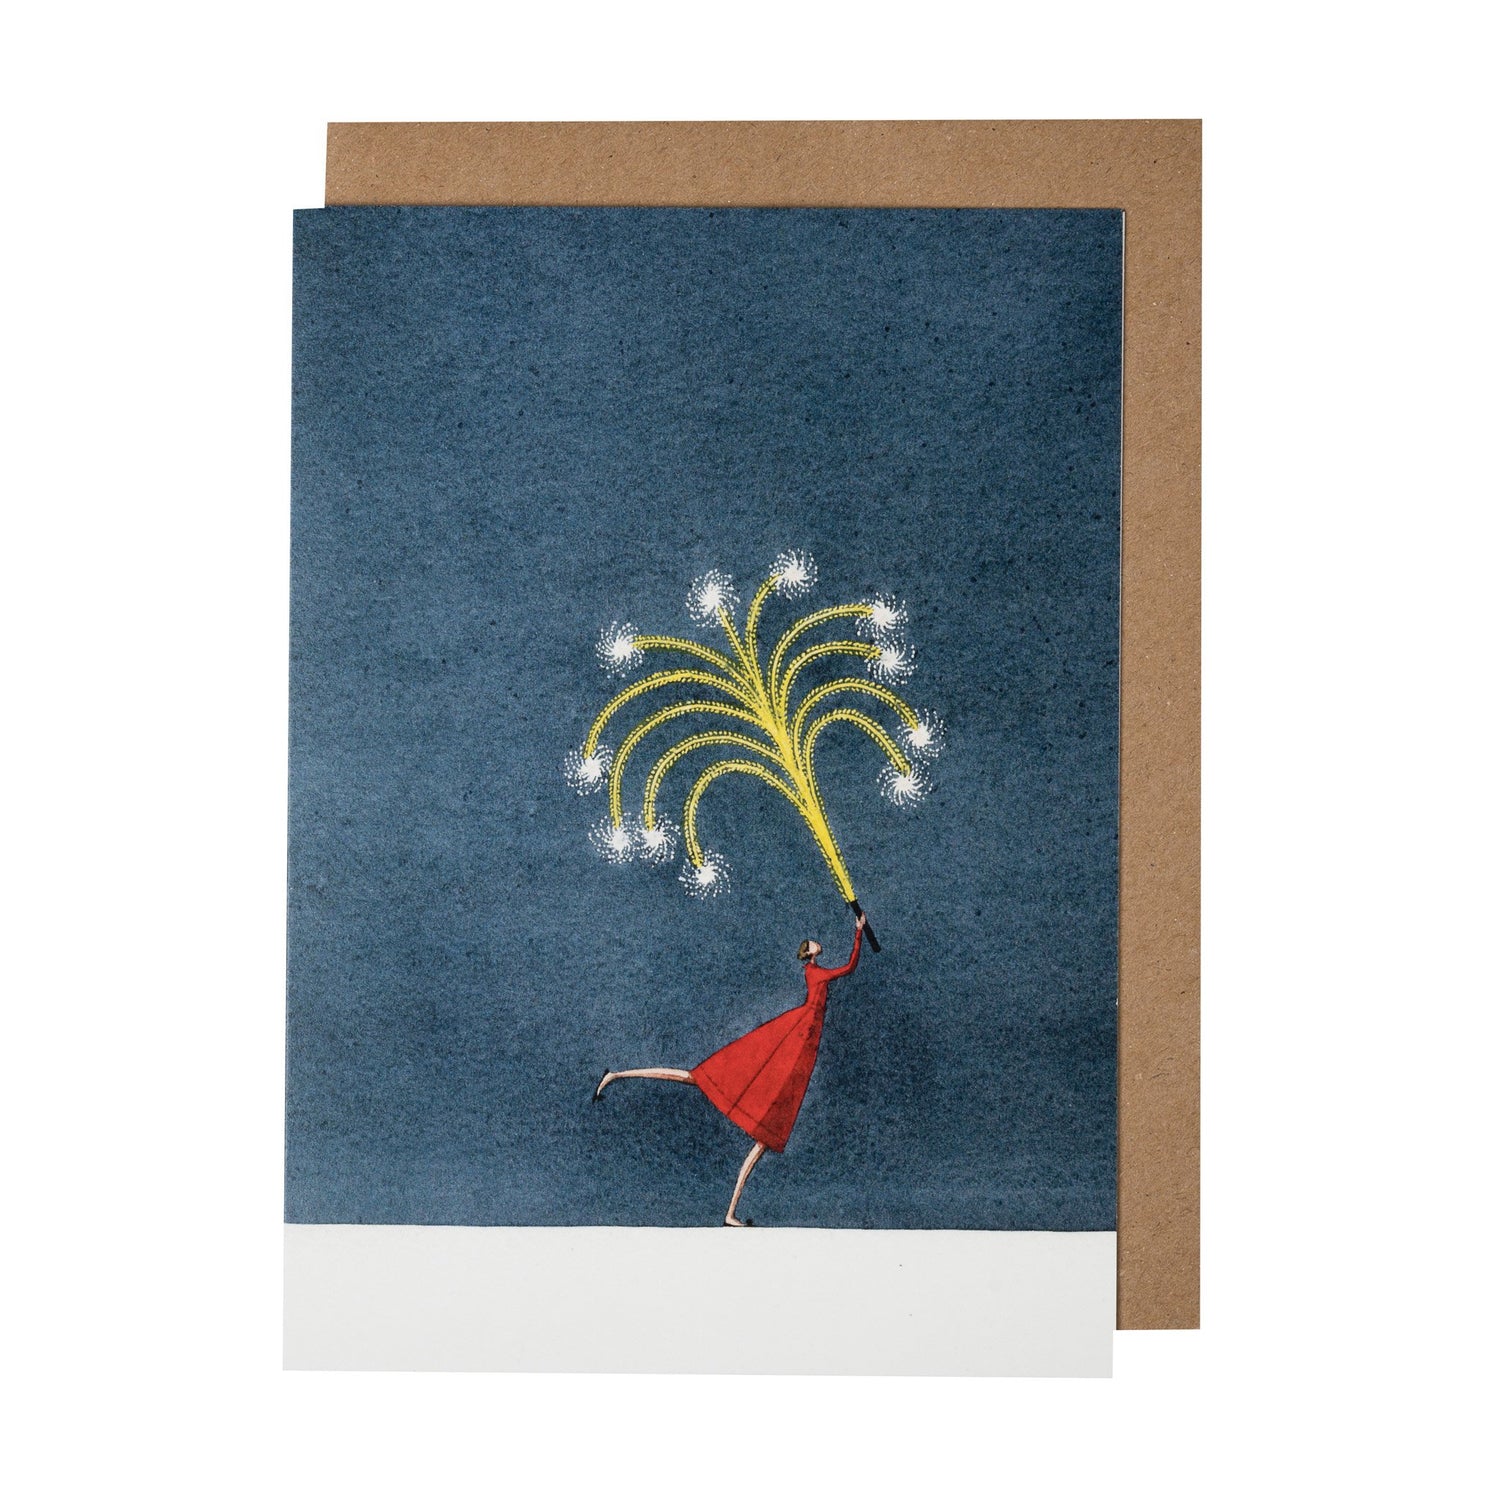 environmentally sustainable paper, compostable packaging, recycled paper, made in england, illustration, firework